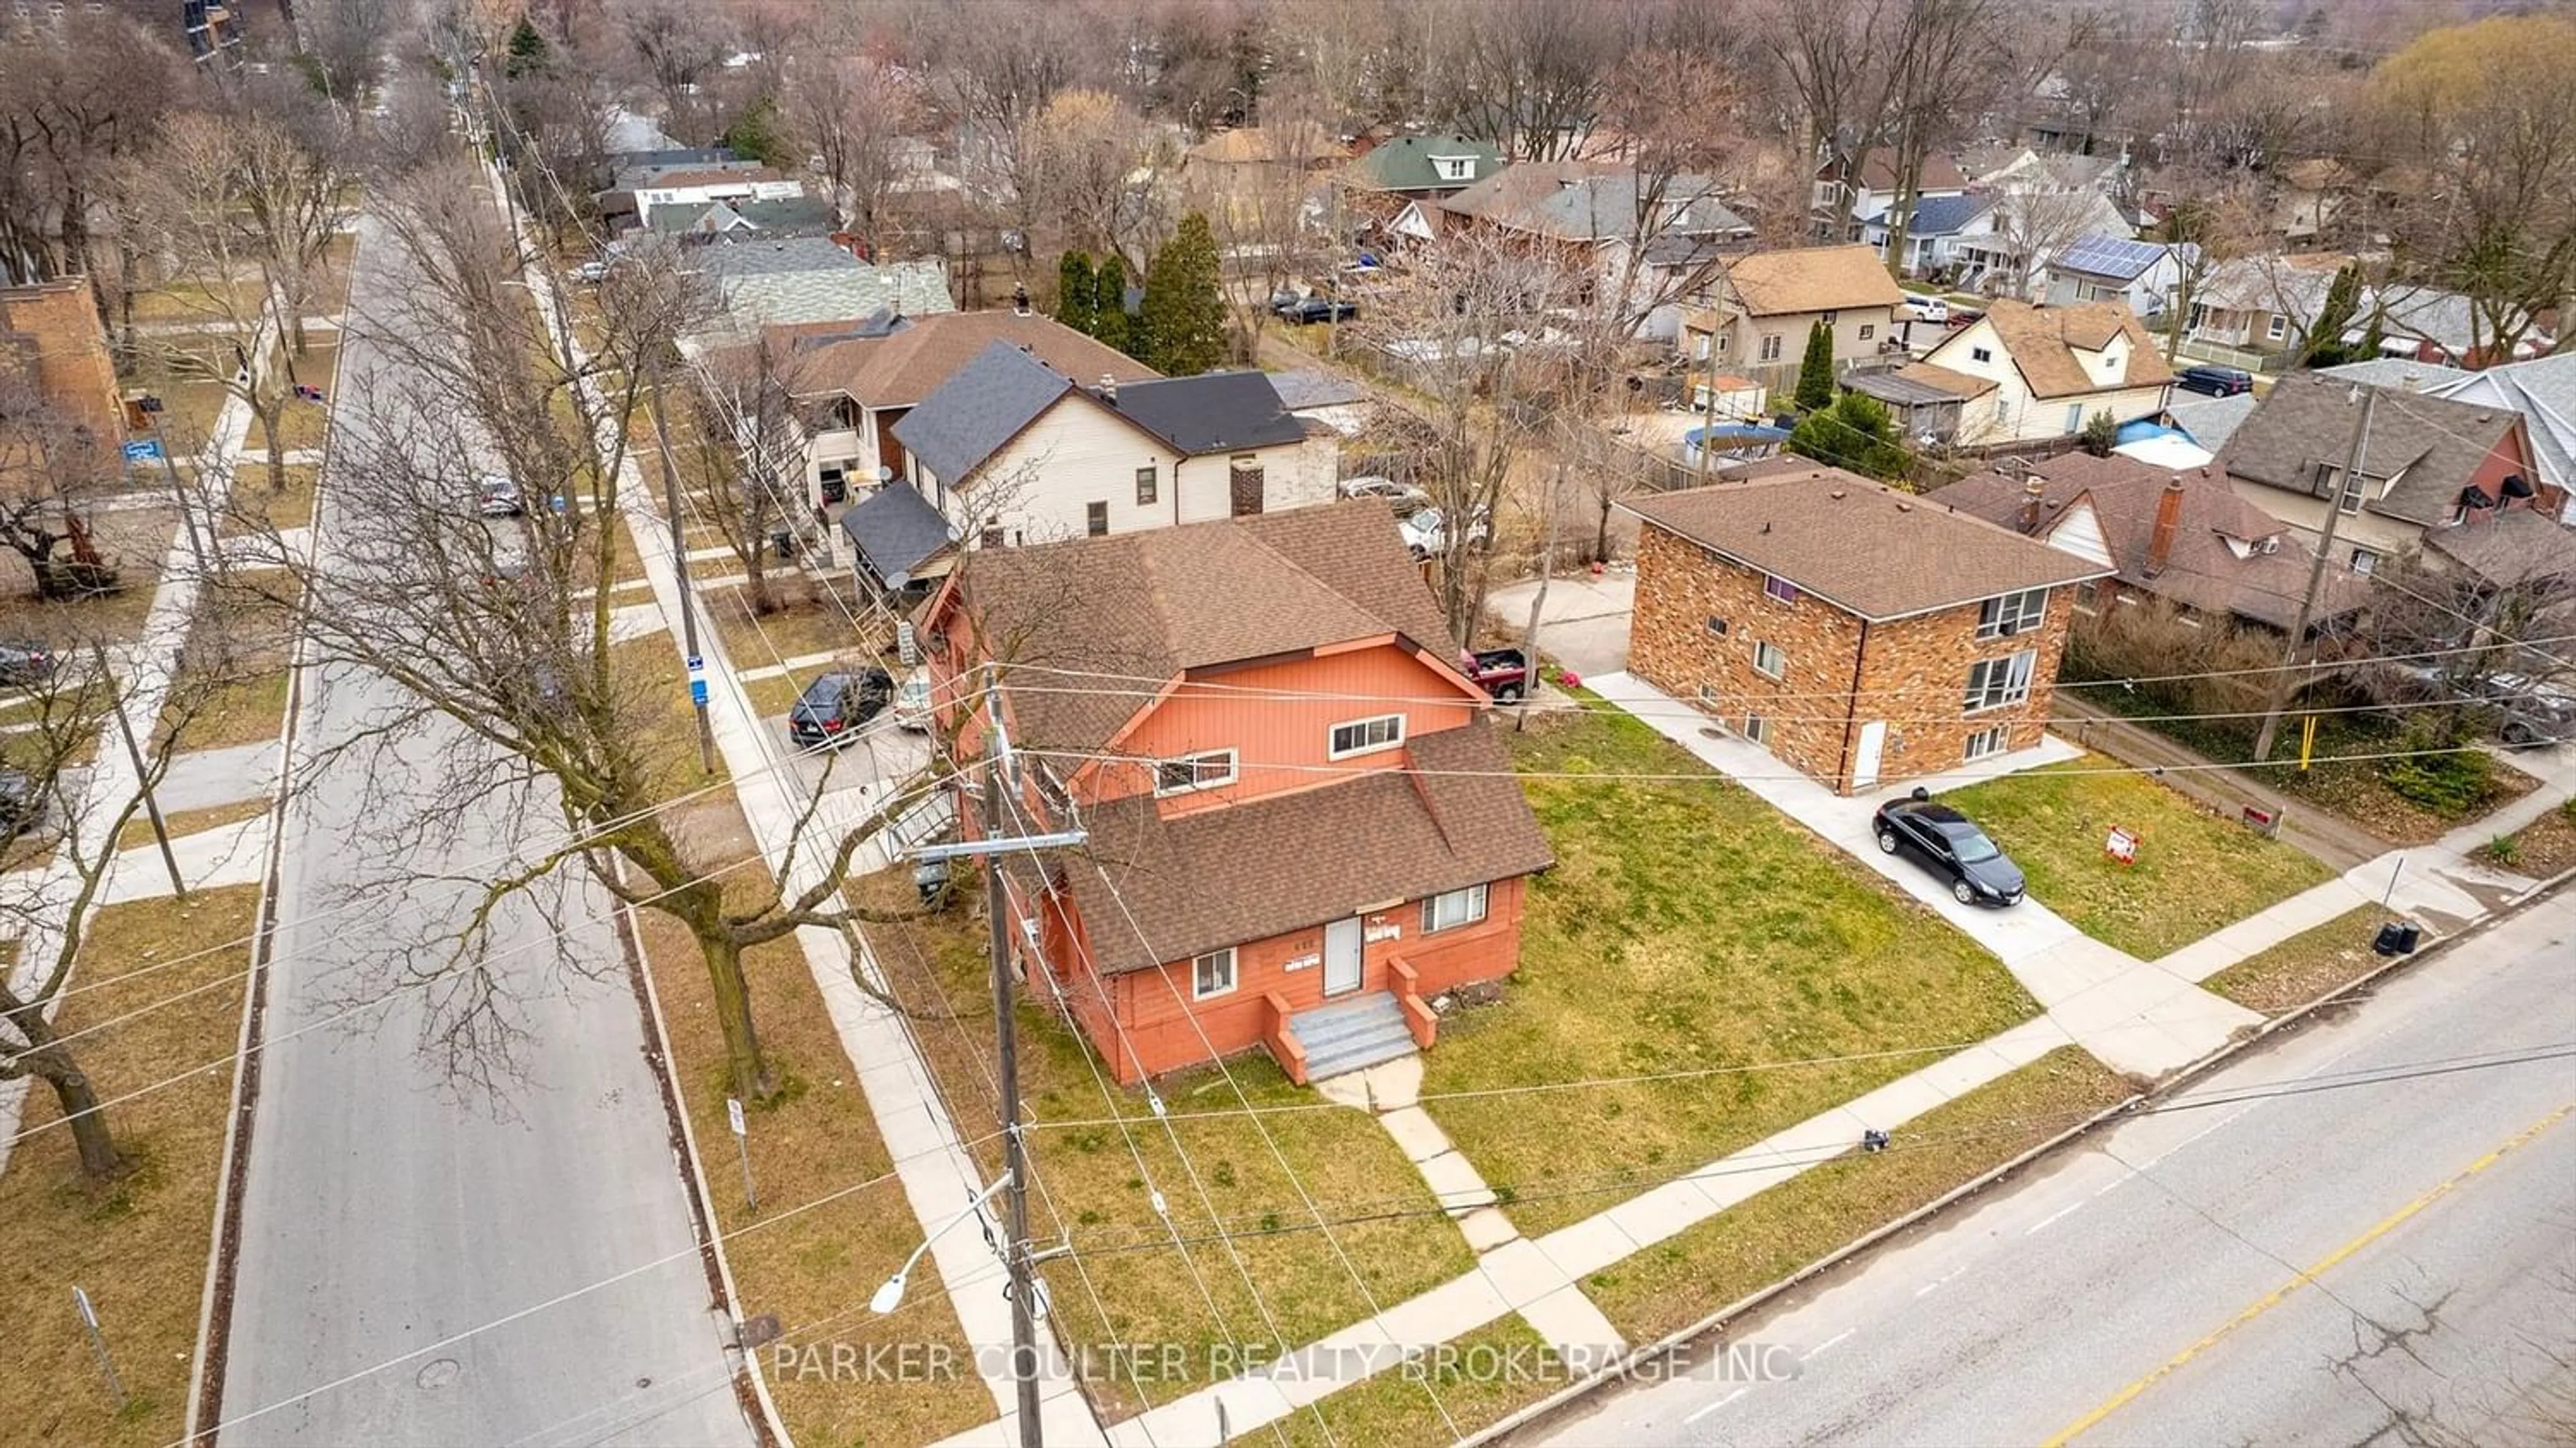 Frontside or backside of a home for 412 Prince Rd, Windsor Ontario N9C 2Y8